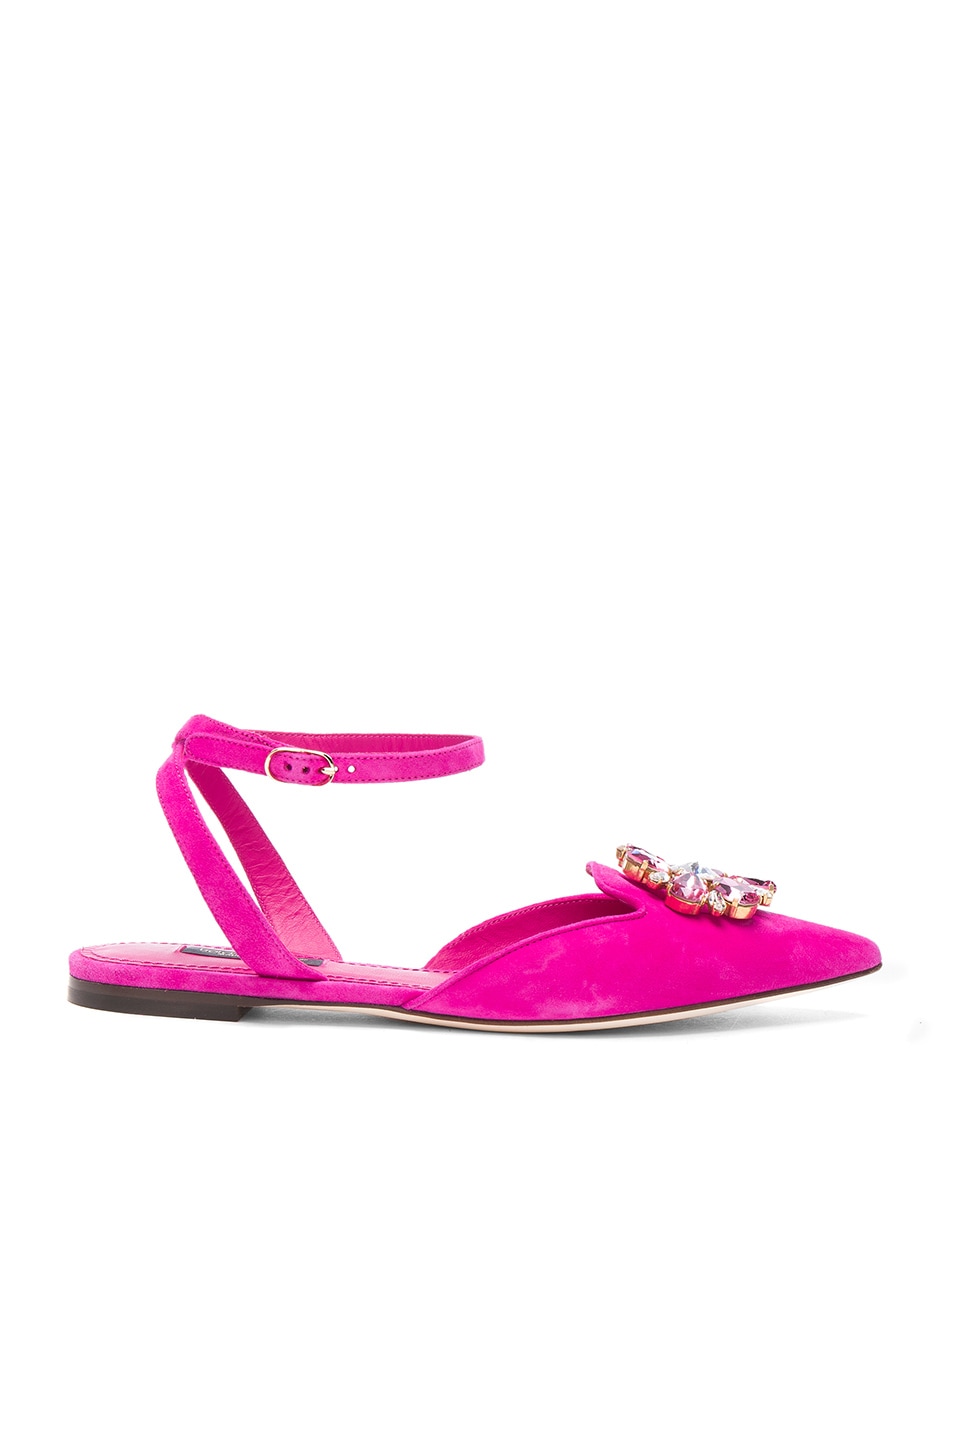 Image 1 of Dolce & Gabbana Suede Belucci Flats in Shocking Pink